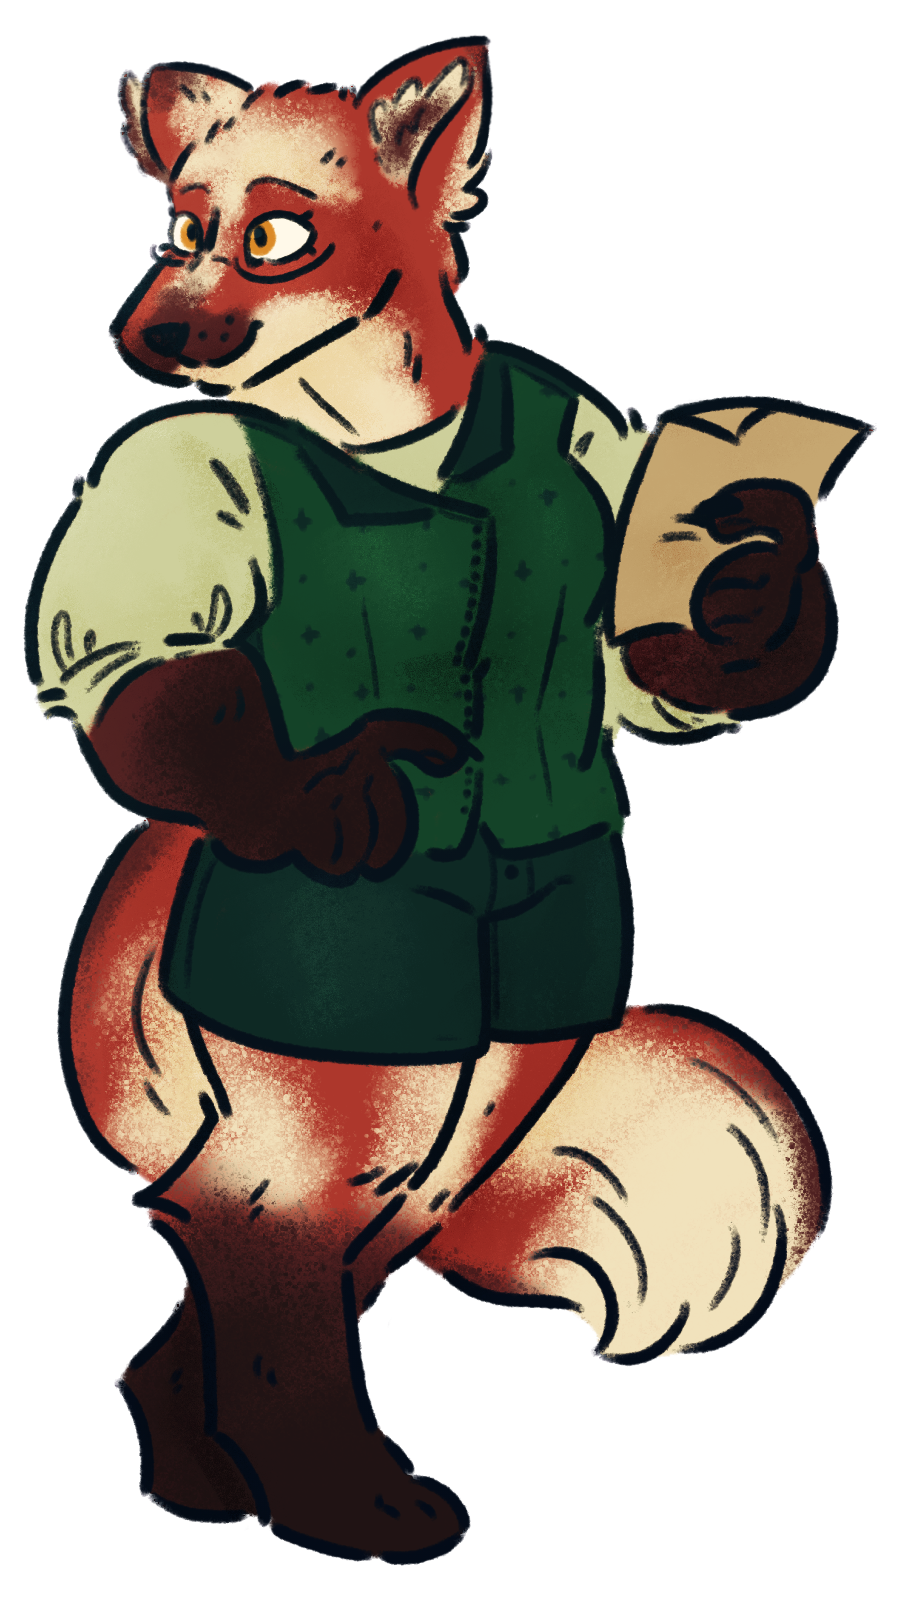 It is an illustration of the artist's character, Mayor Thimblepaw. She is an anthropomorphic fox.